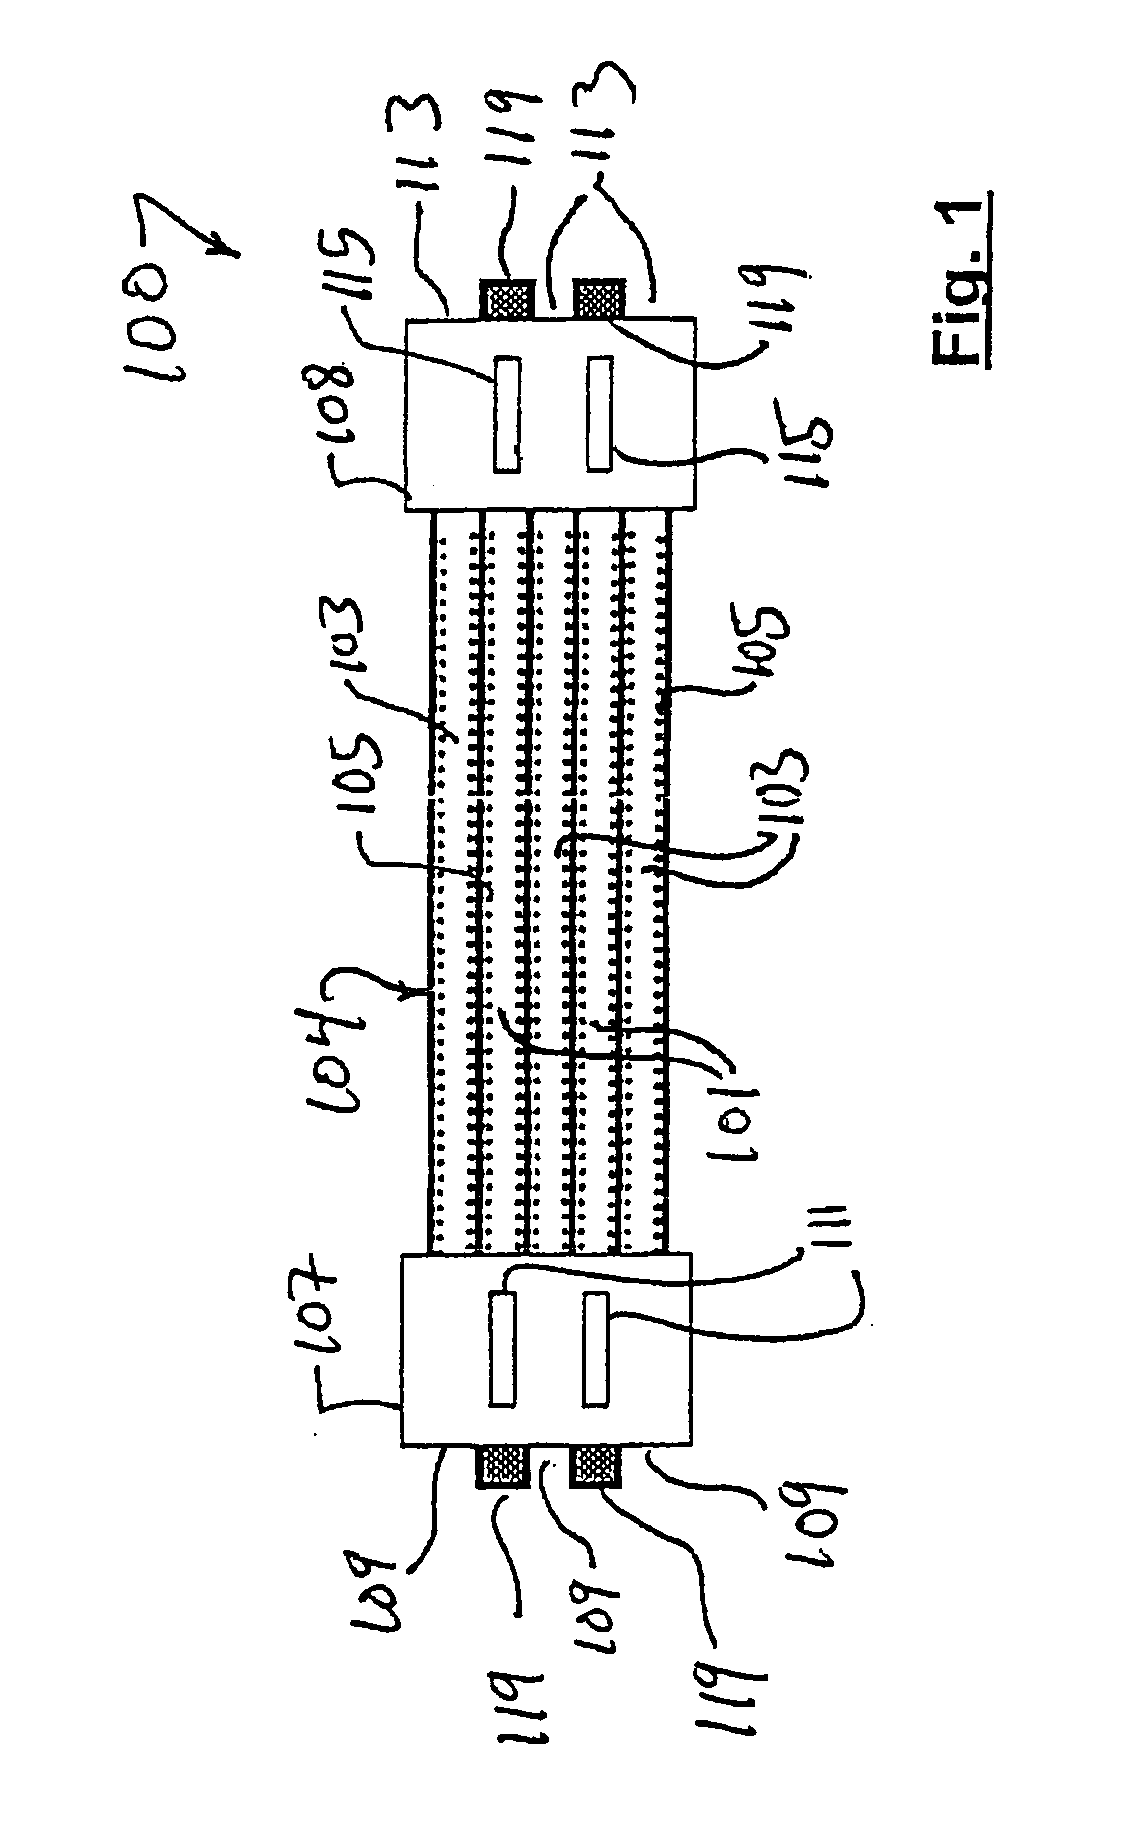 Thermally coupled monolith reactor